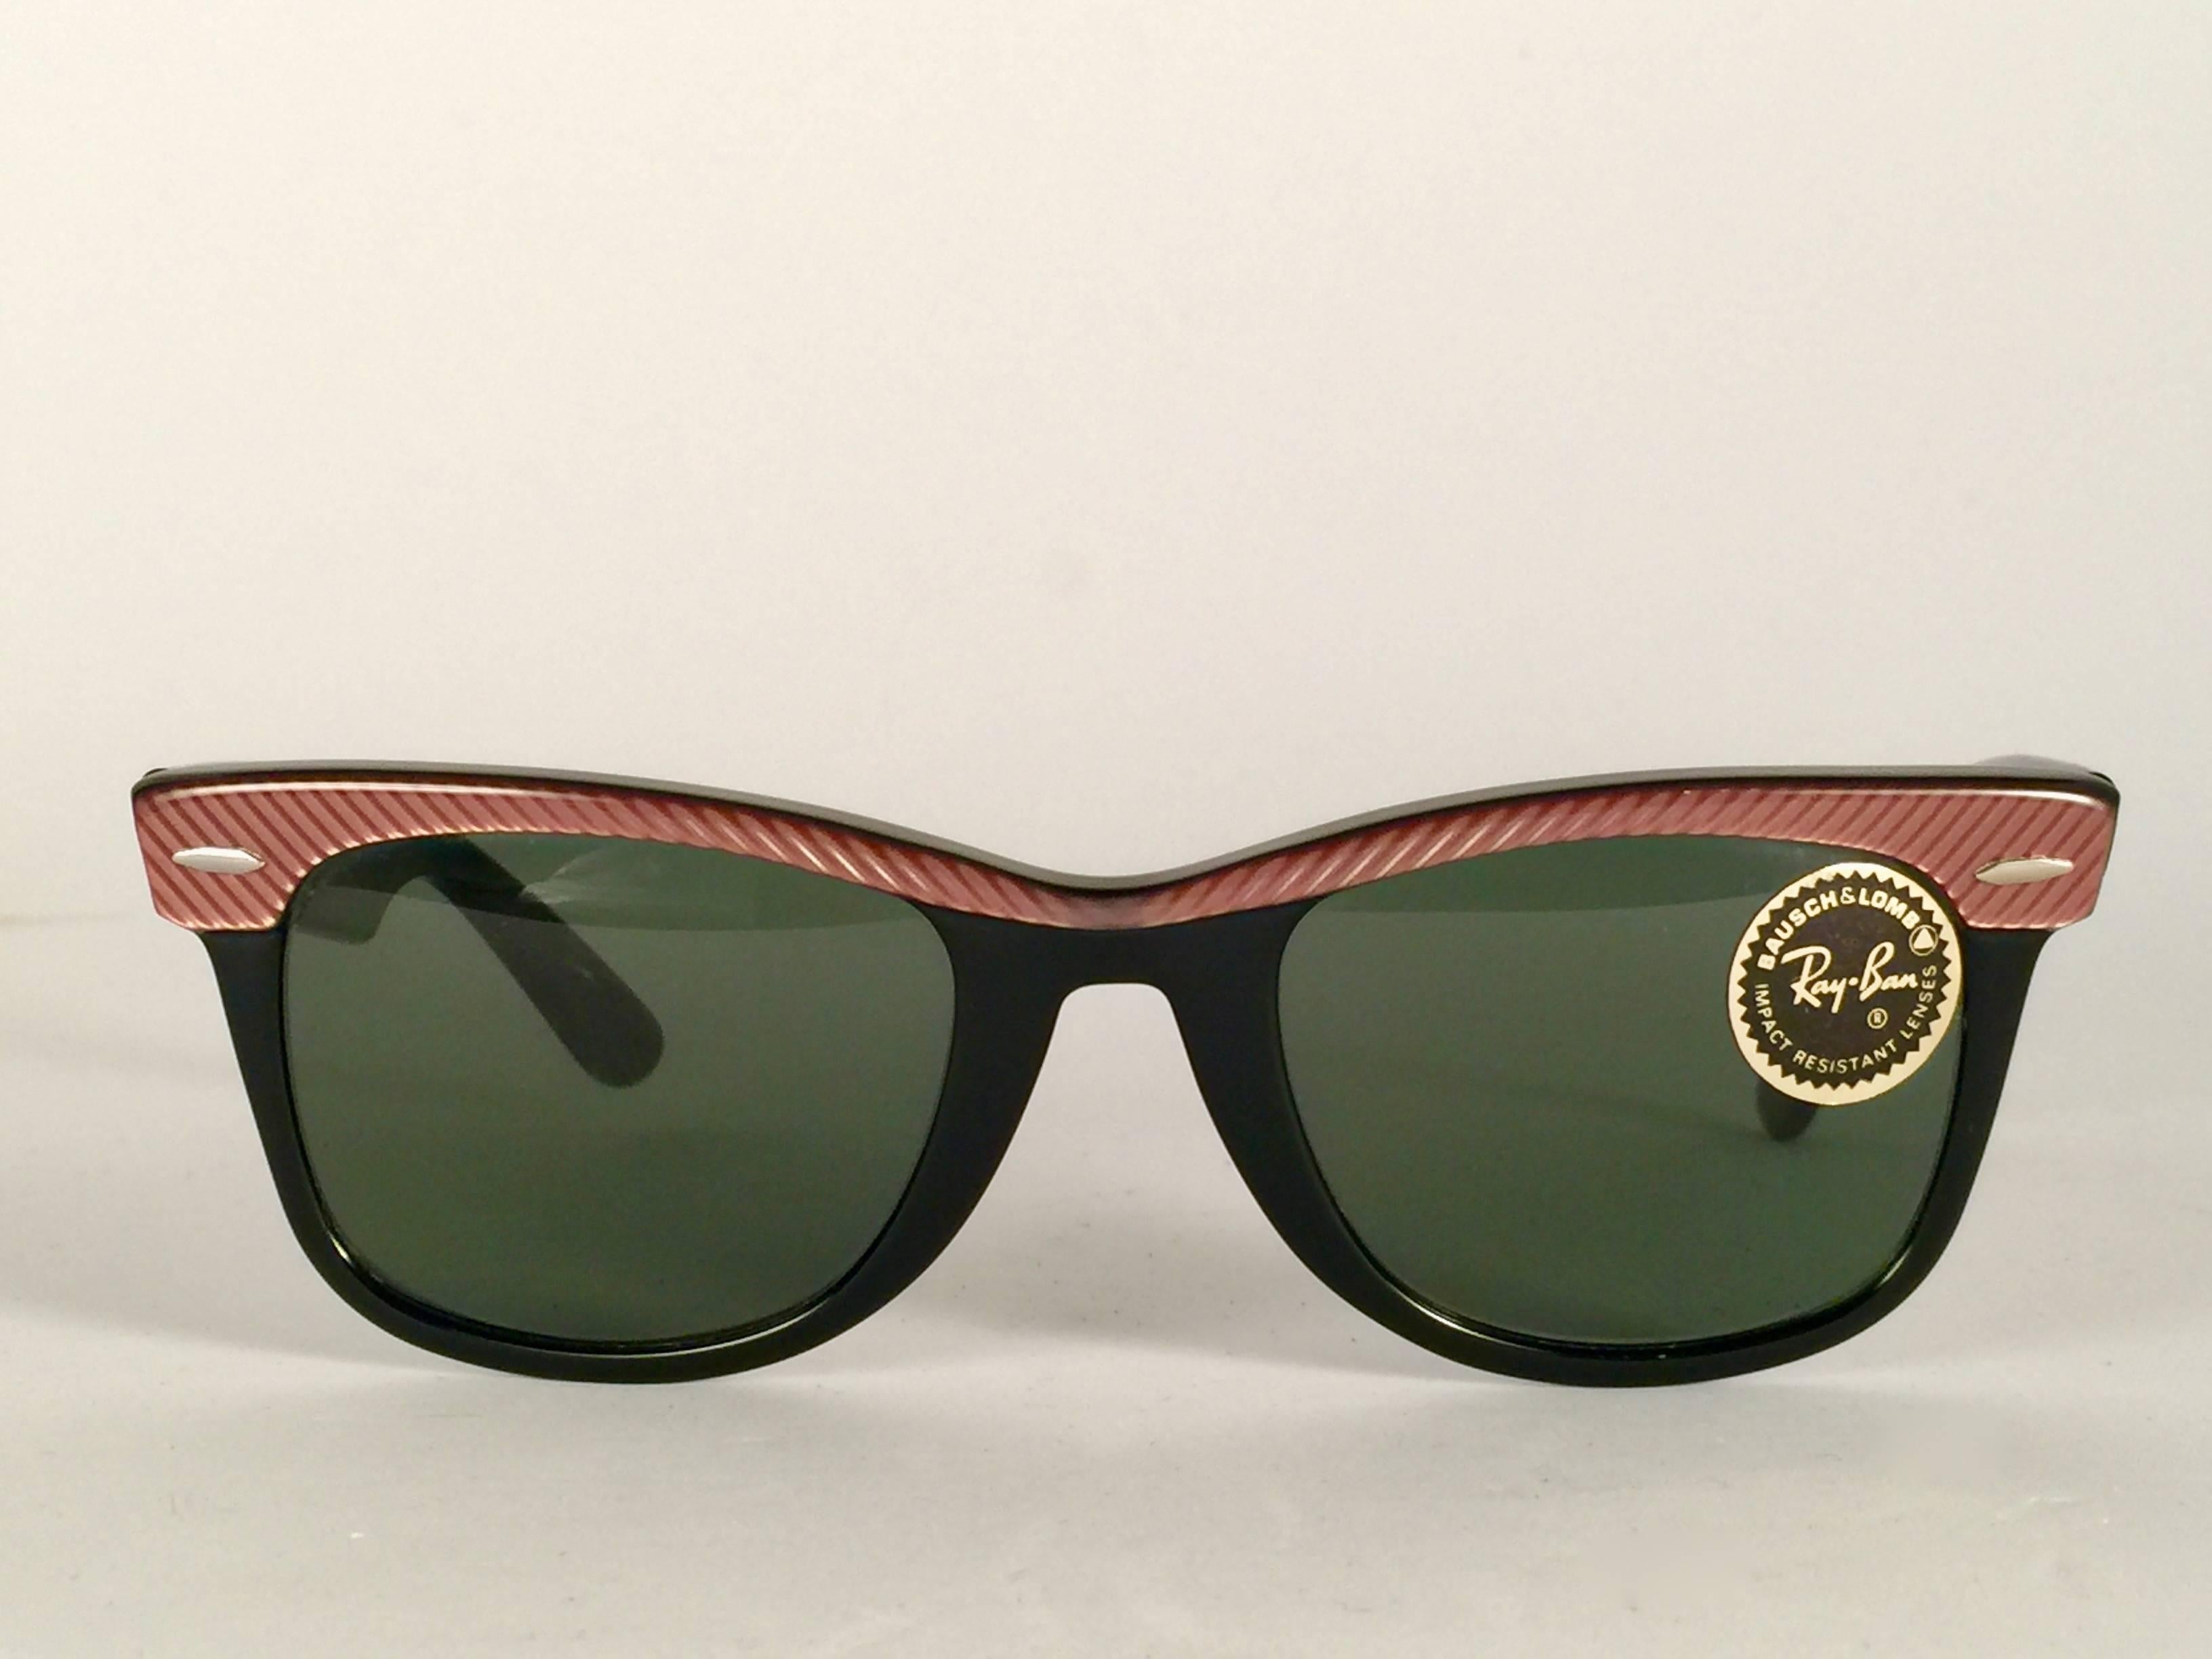 New classic Wayfarer in rose & black. B&L etched in both G15 grey lenses. Please notice that this item is nearly 40 years old and could show some storage wear.  
New, ever worn or displayed.